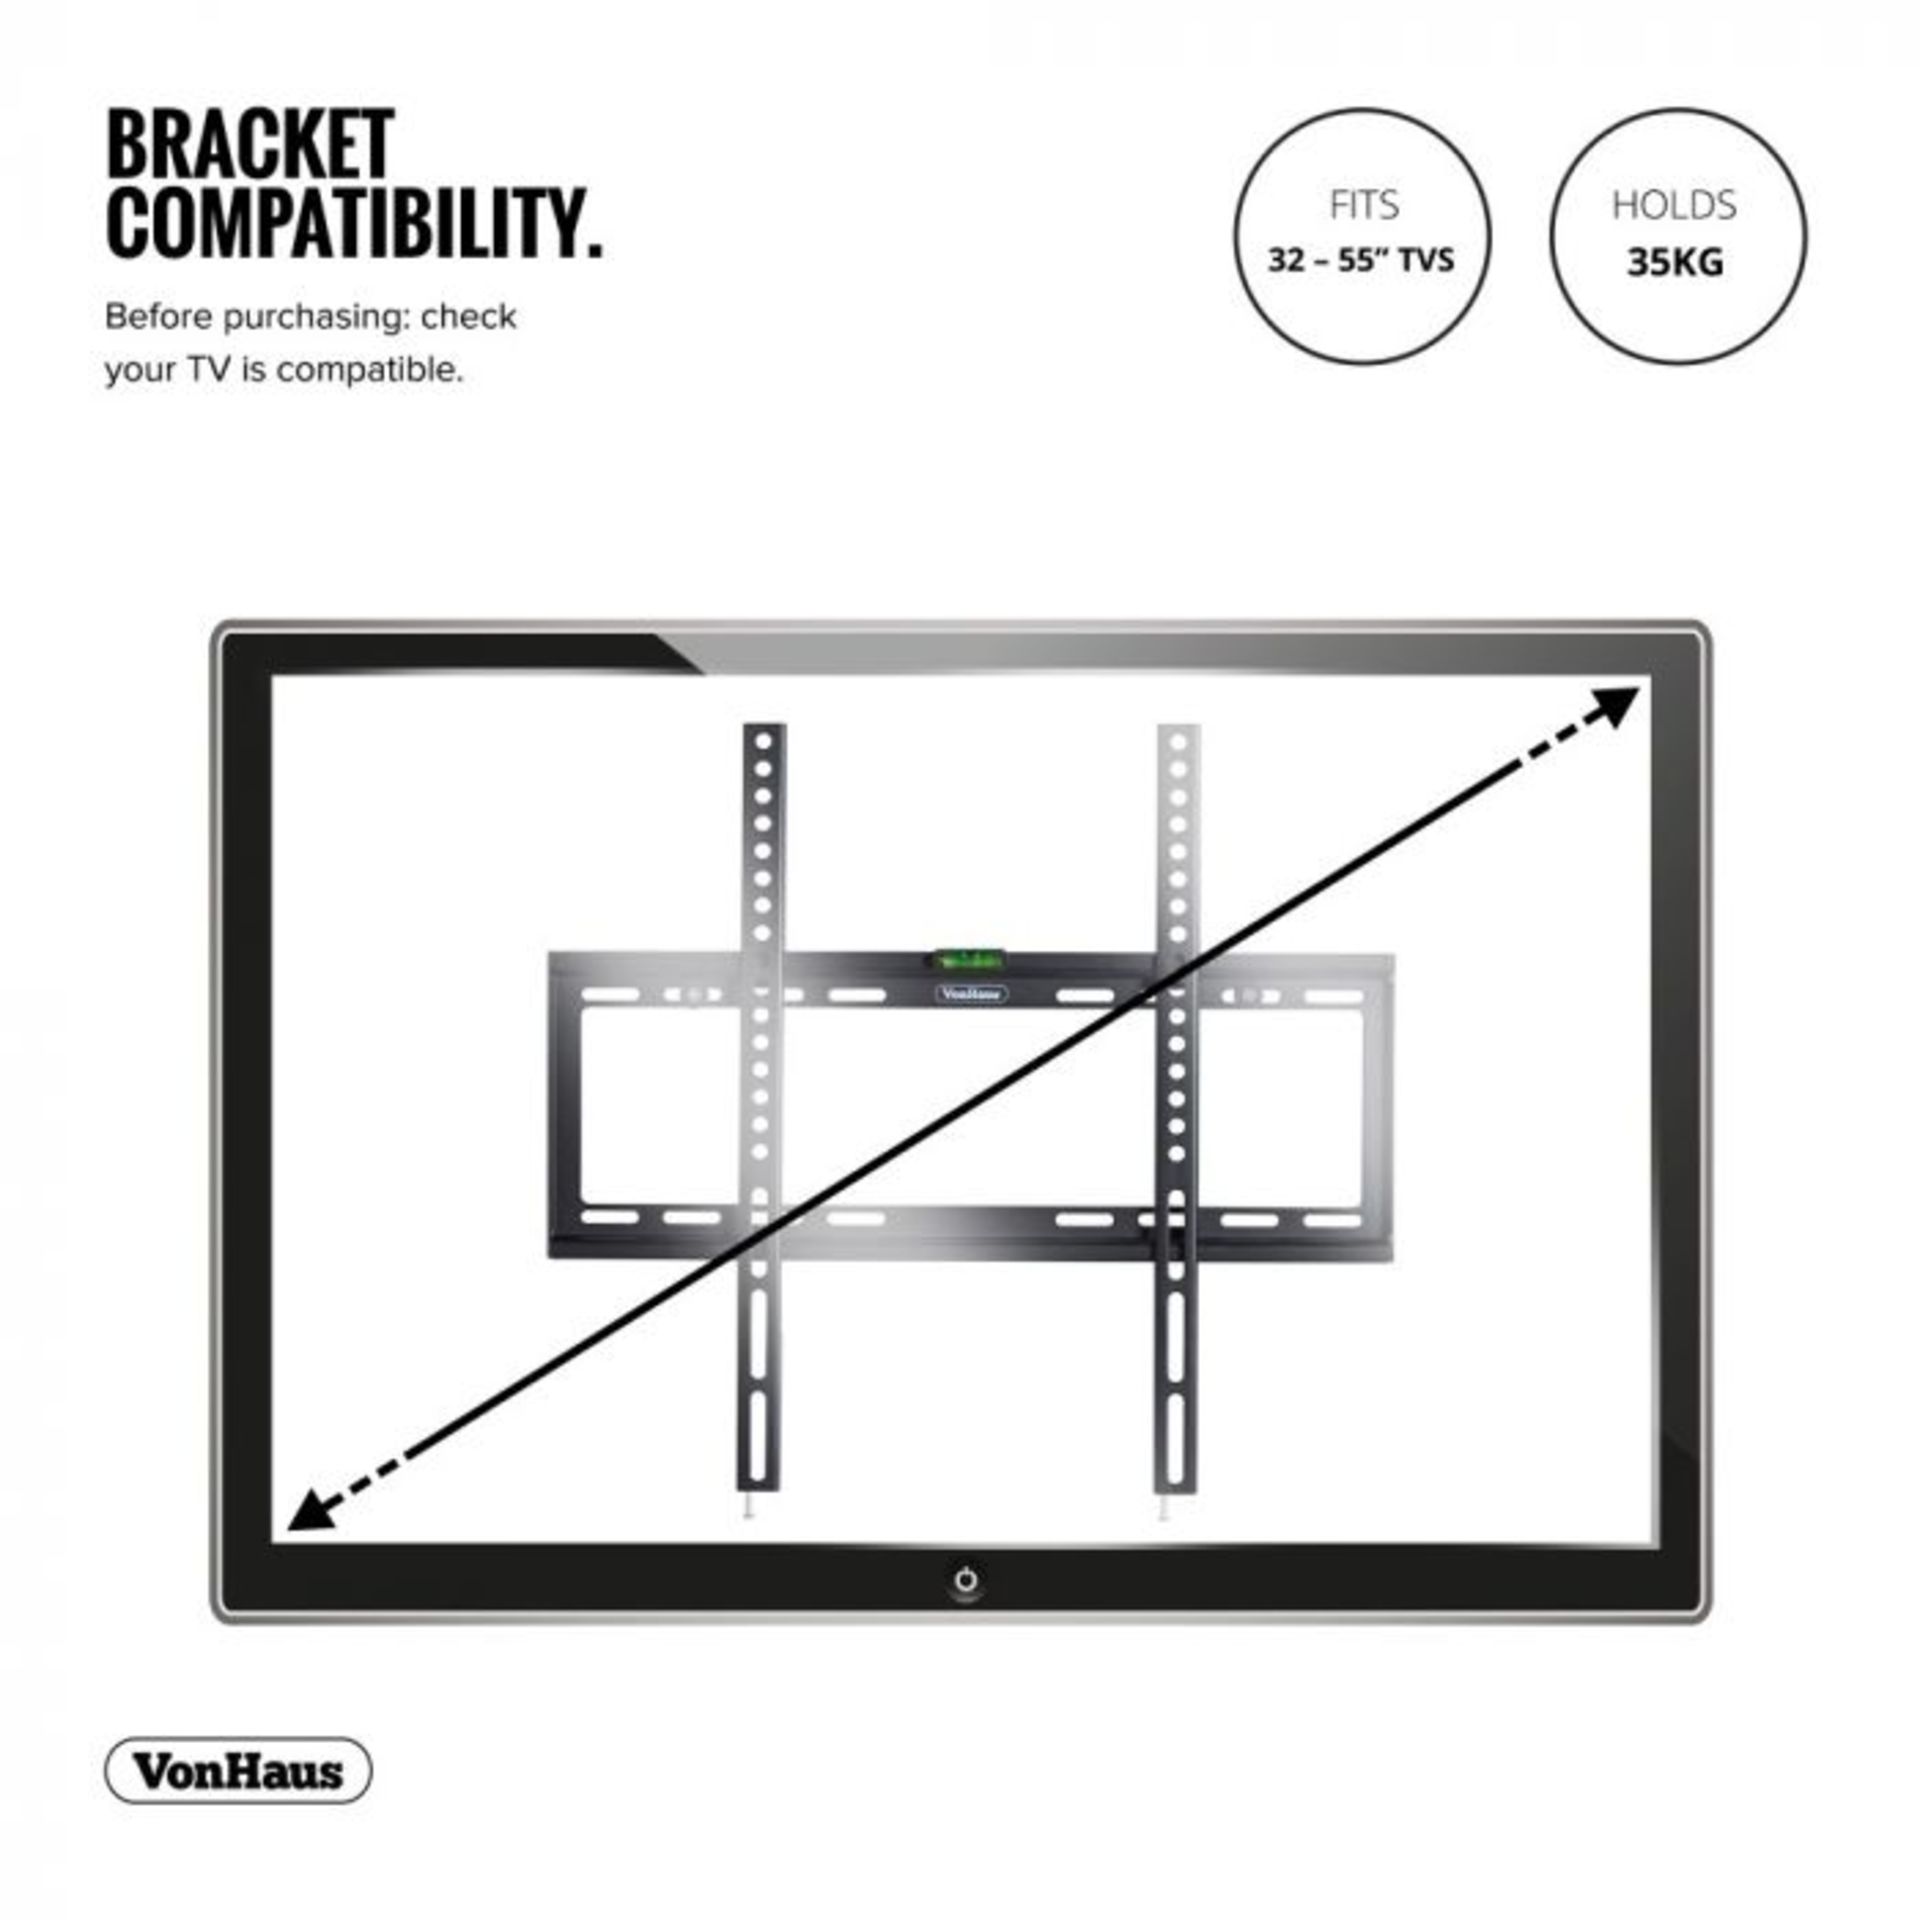 (S77) 32-55 inch Flat-to-wall TV bracket Please confirm your TV’s VESA Mounting Dimensions a... - Image 3 of 5